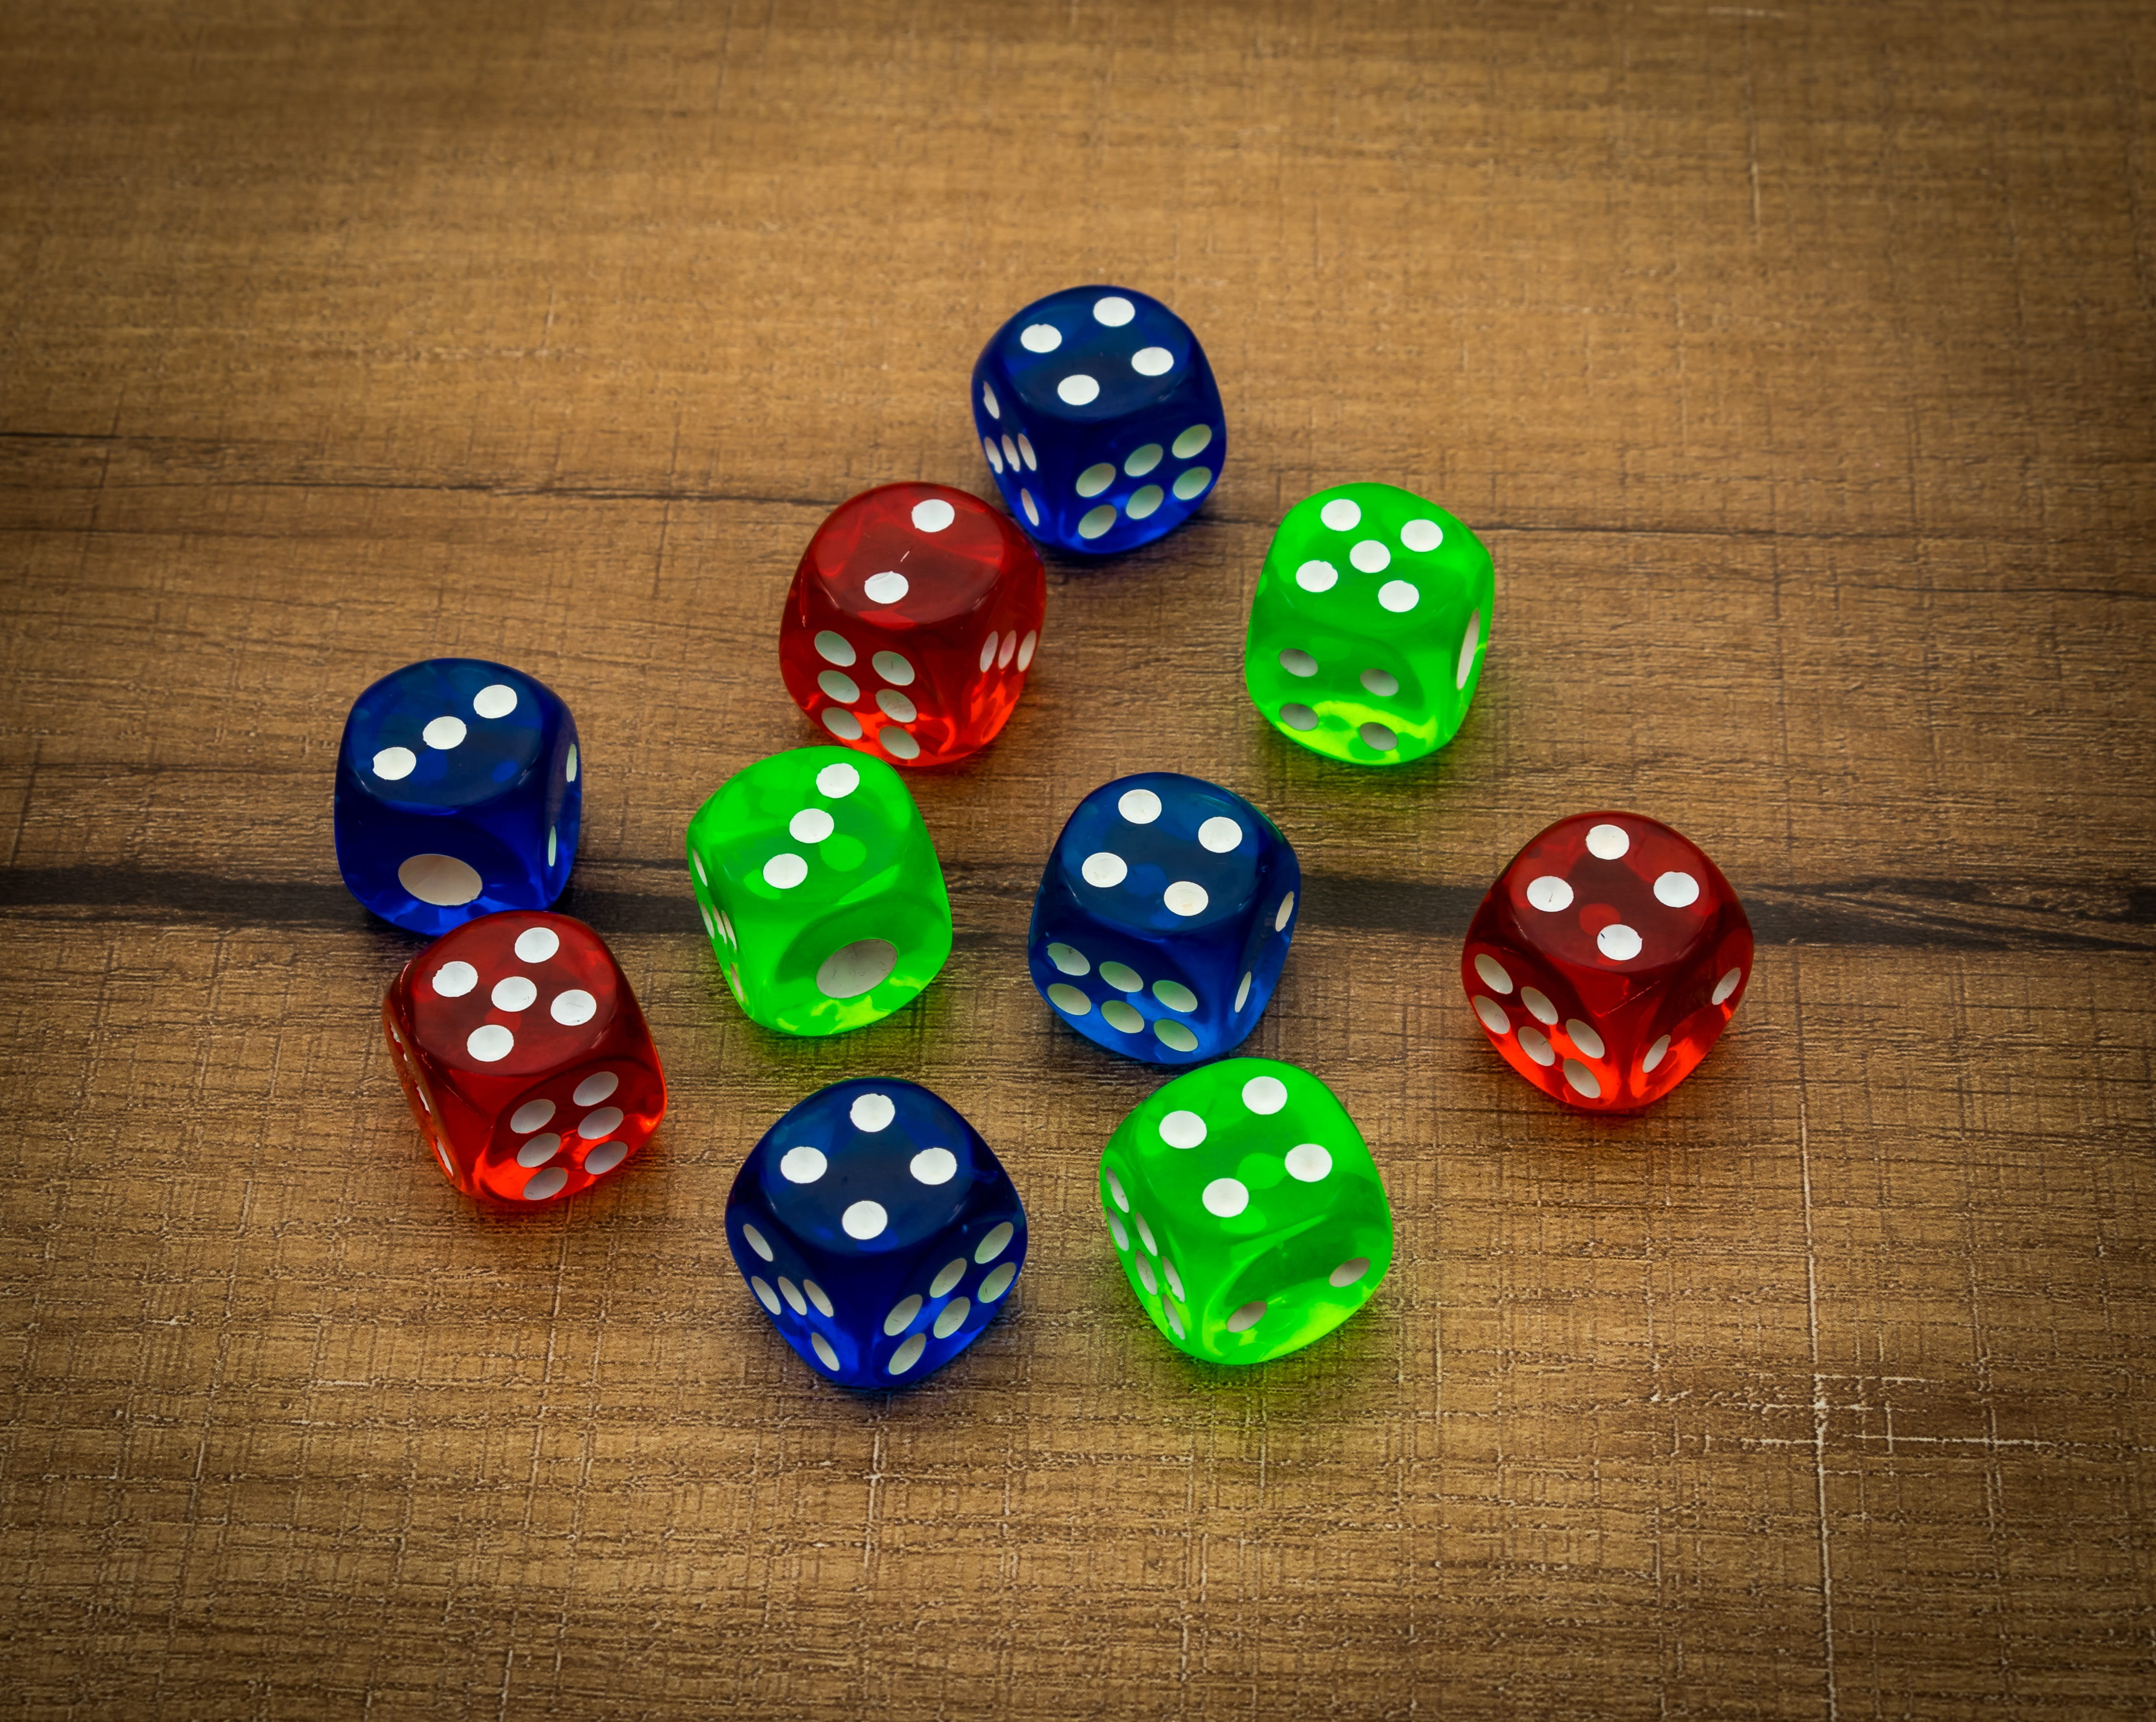 bet, betting, casino, chance, color, colorful, cube, dice, fun